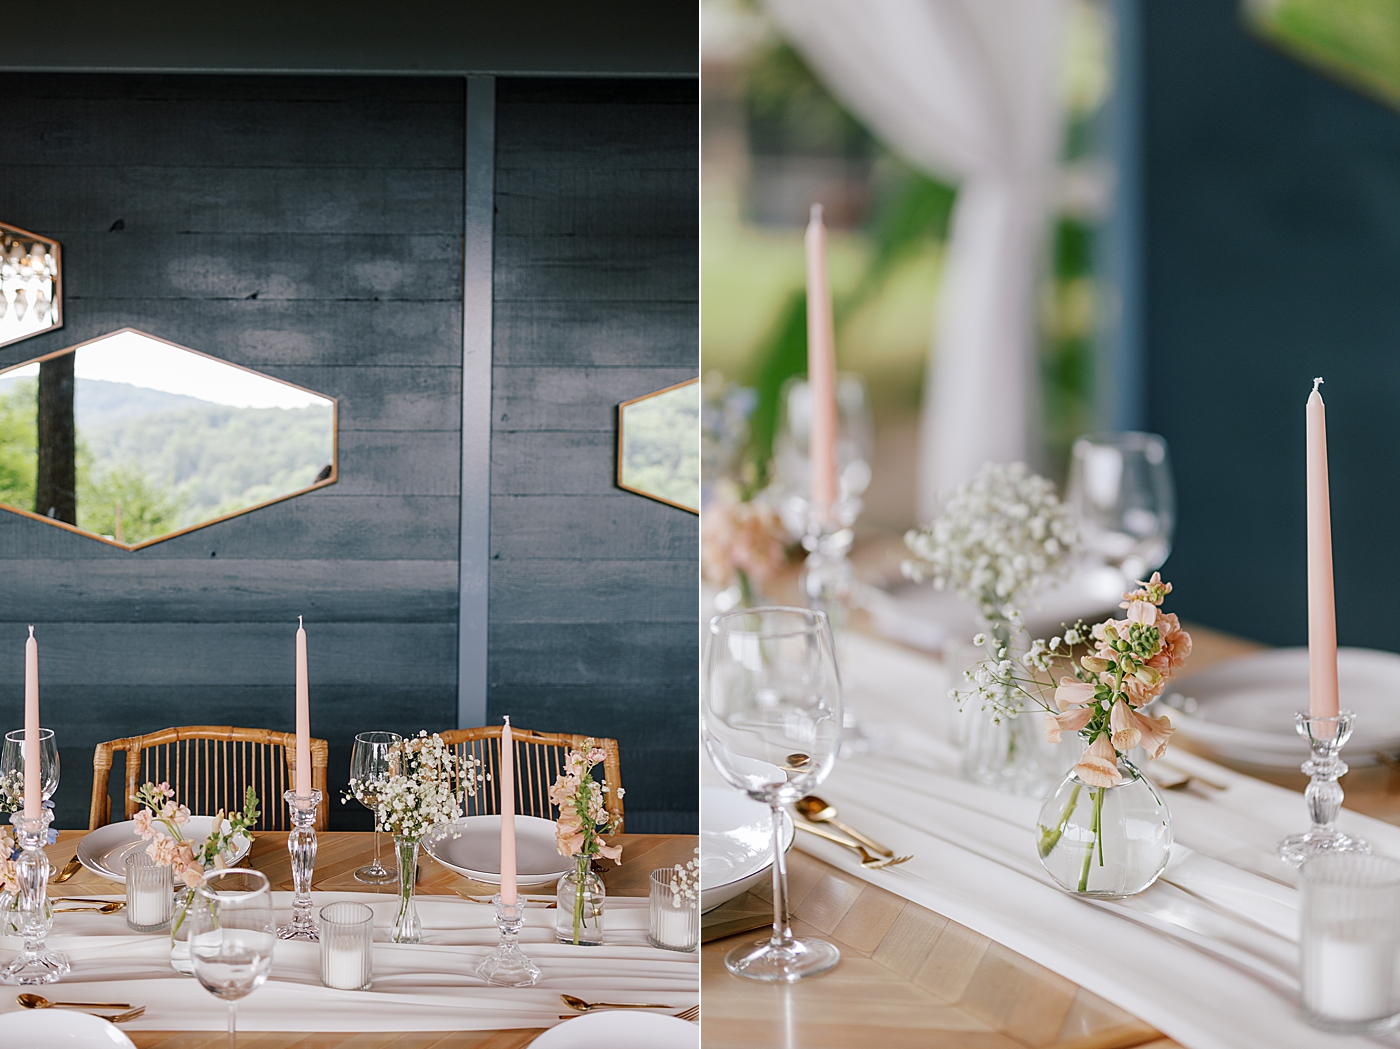 Modern wedding reception table with mirrors on the wall | Image by Hope Helmuth Photography 